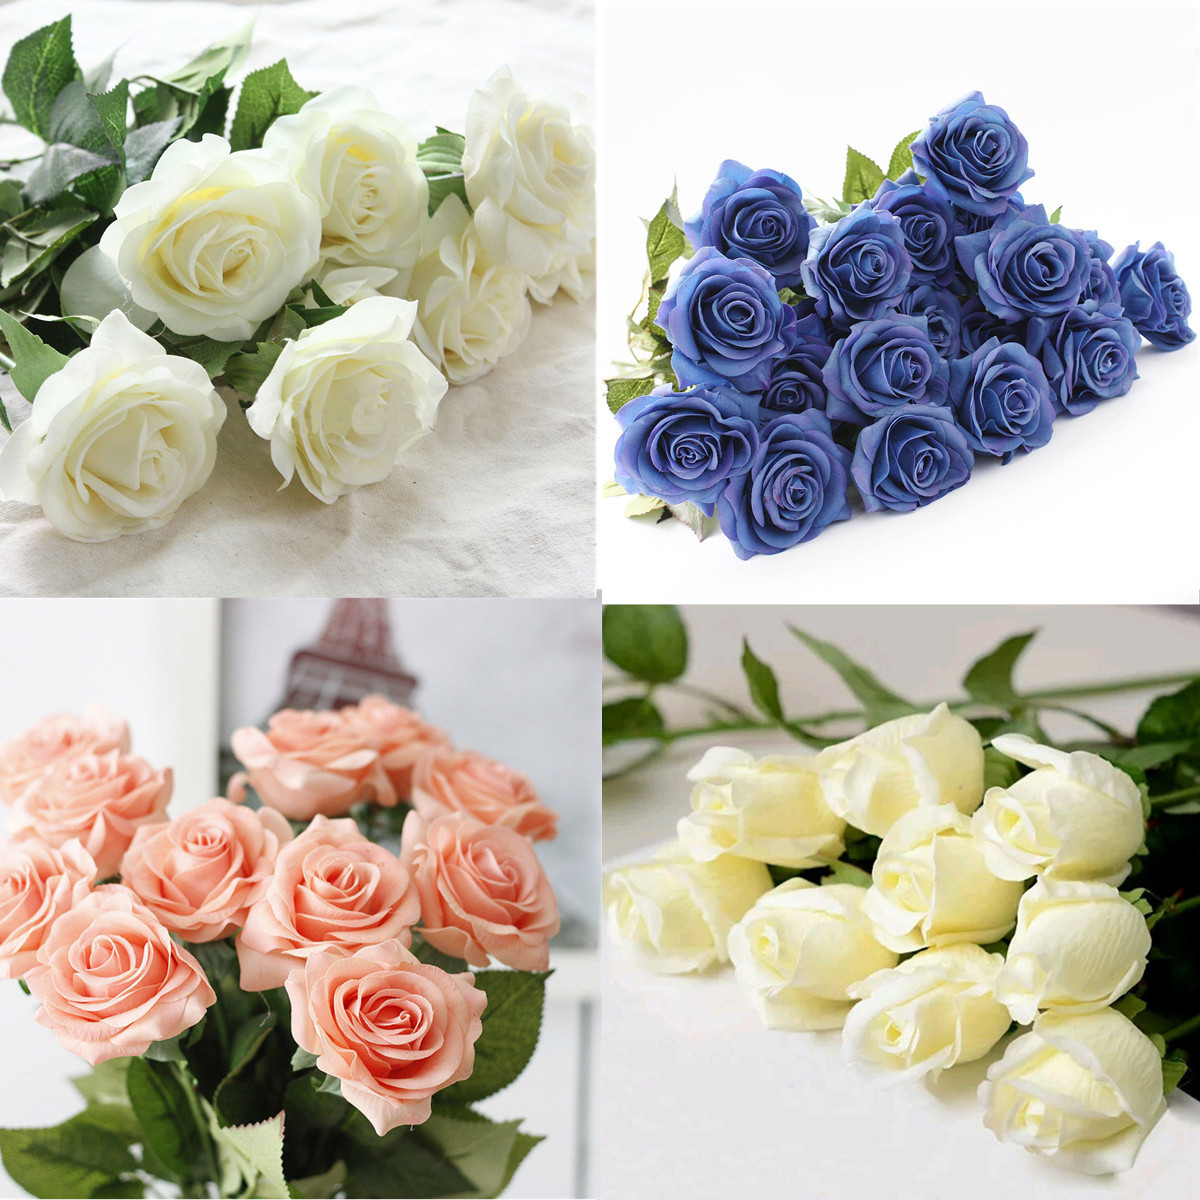 10-Heads-Real-Latex-Touch-Rose-Flowers-Bouquet-Wedding-Home-Decoration-1068041